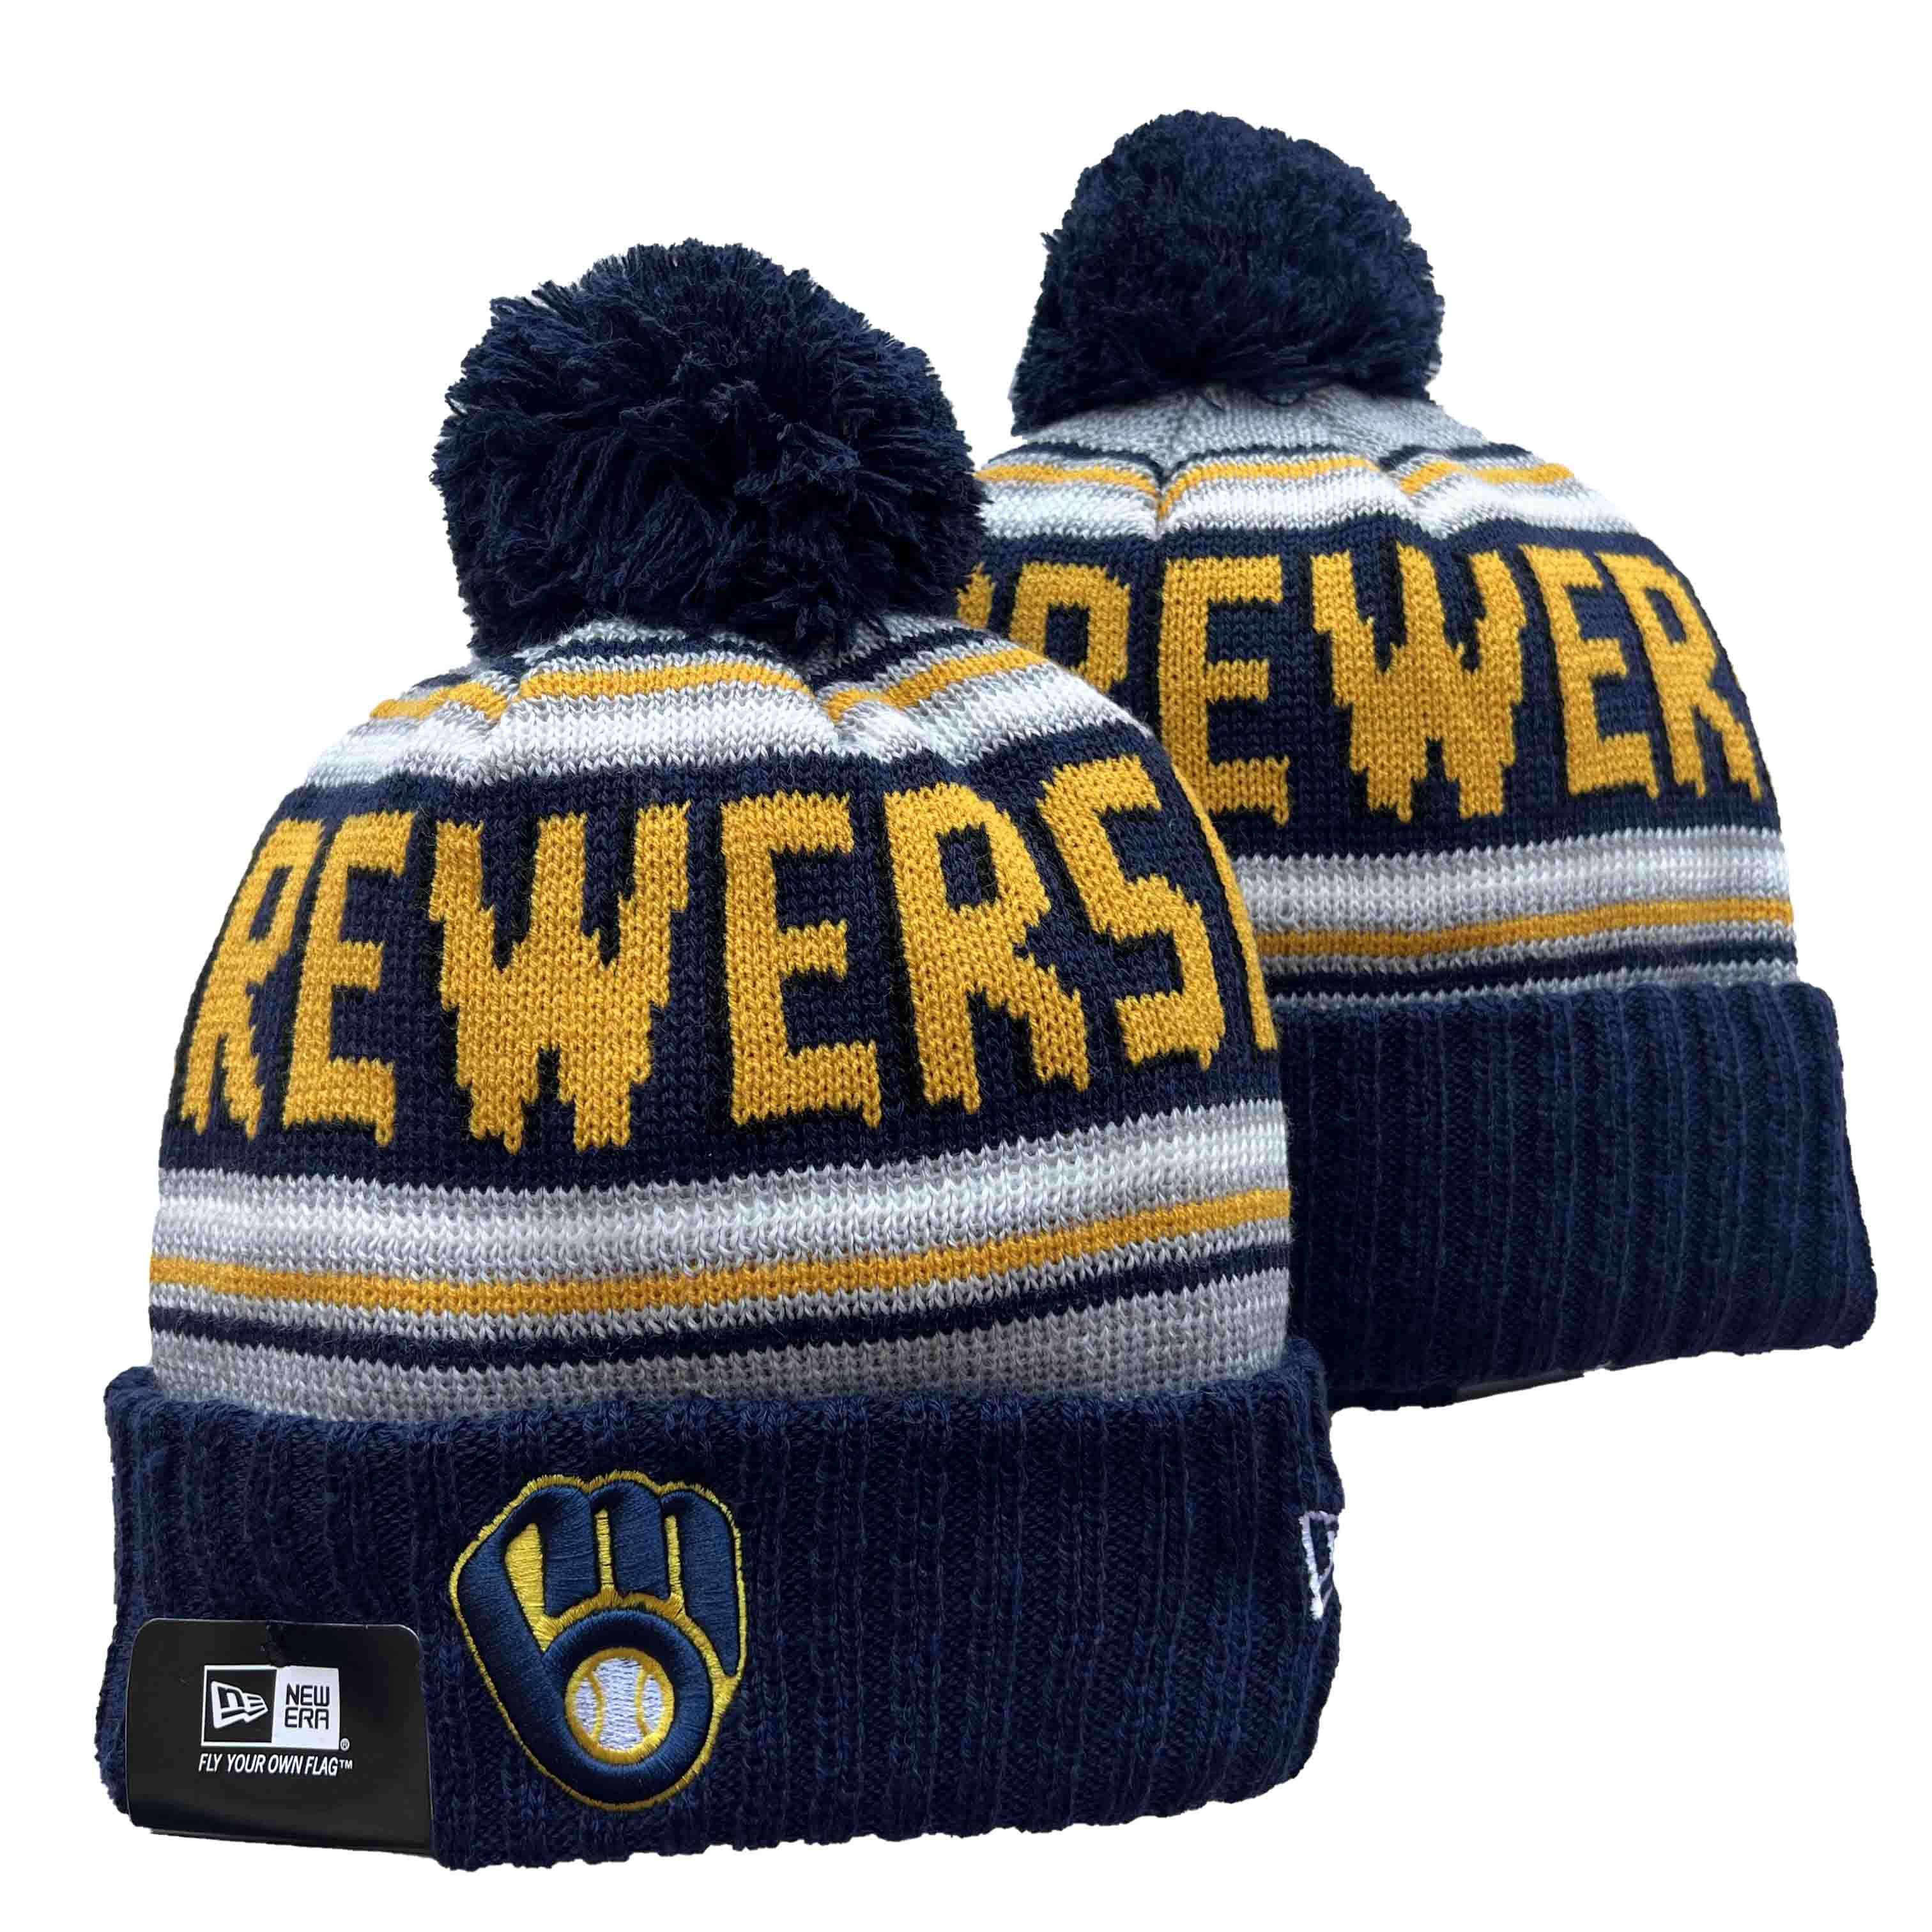 MLB Milwaukee Brewers Beanies Knit Hats-YD179